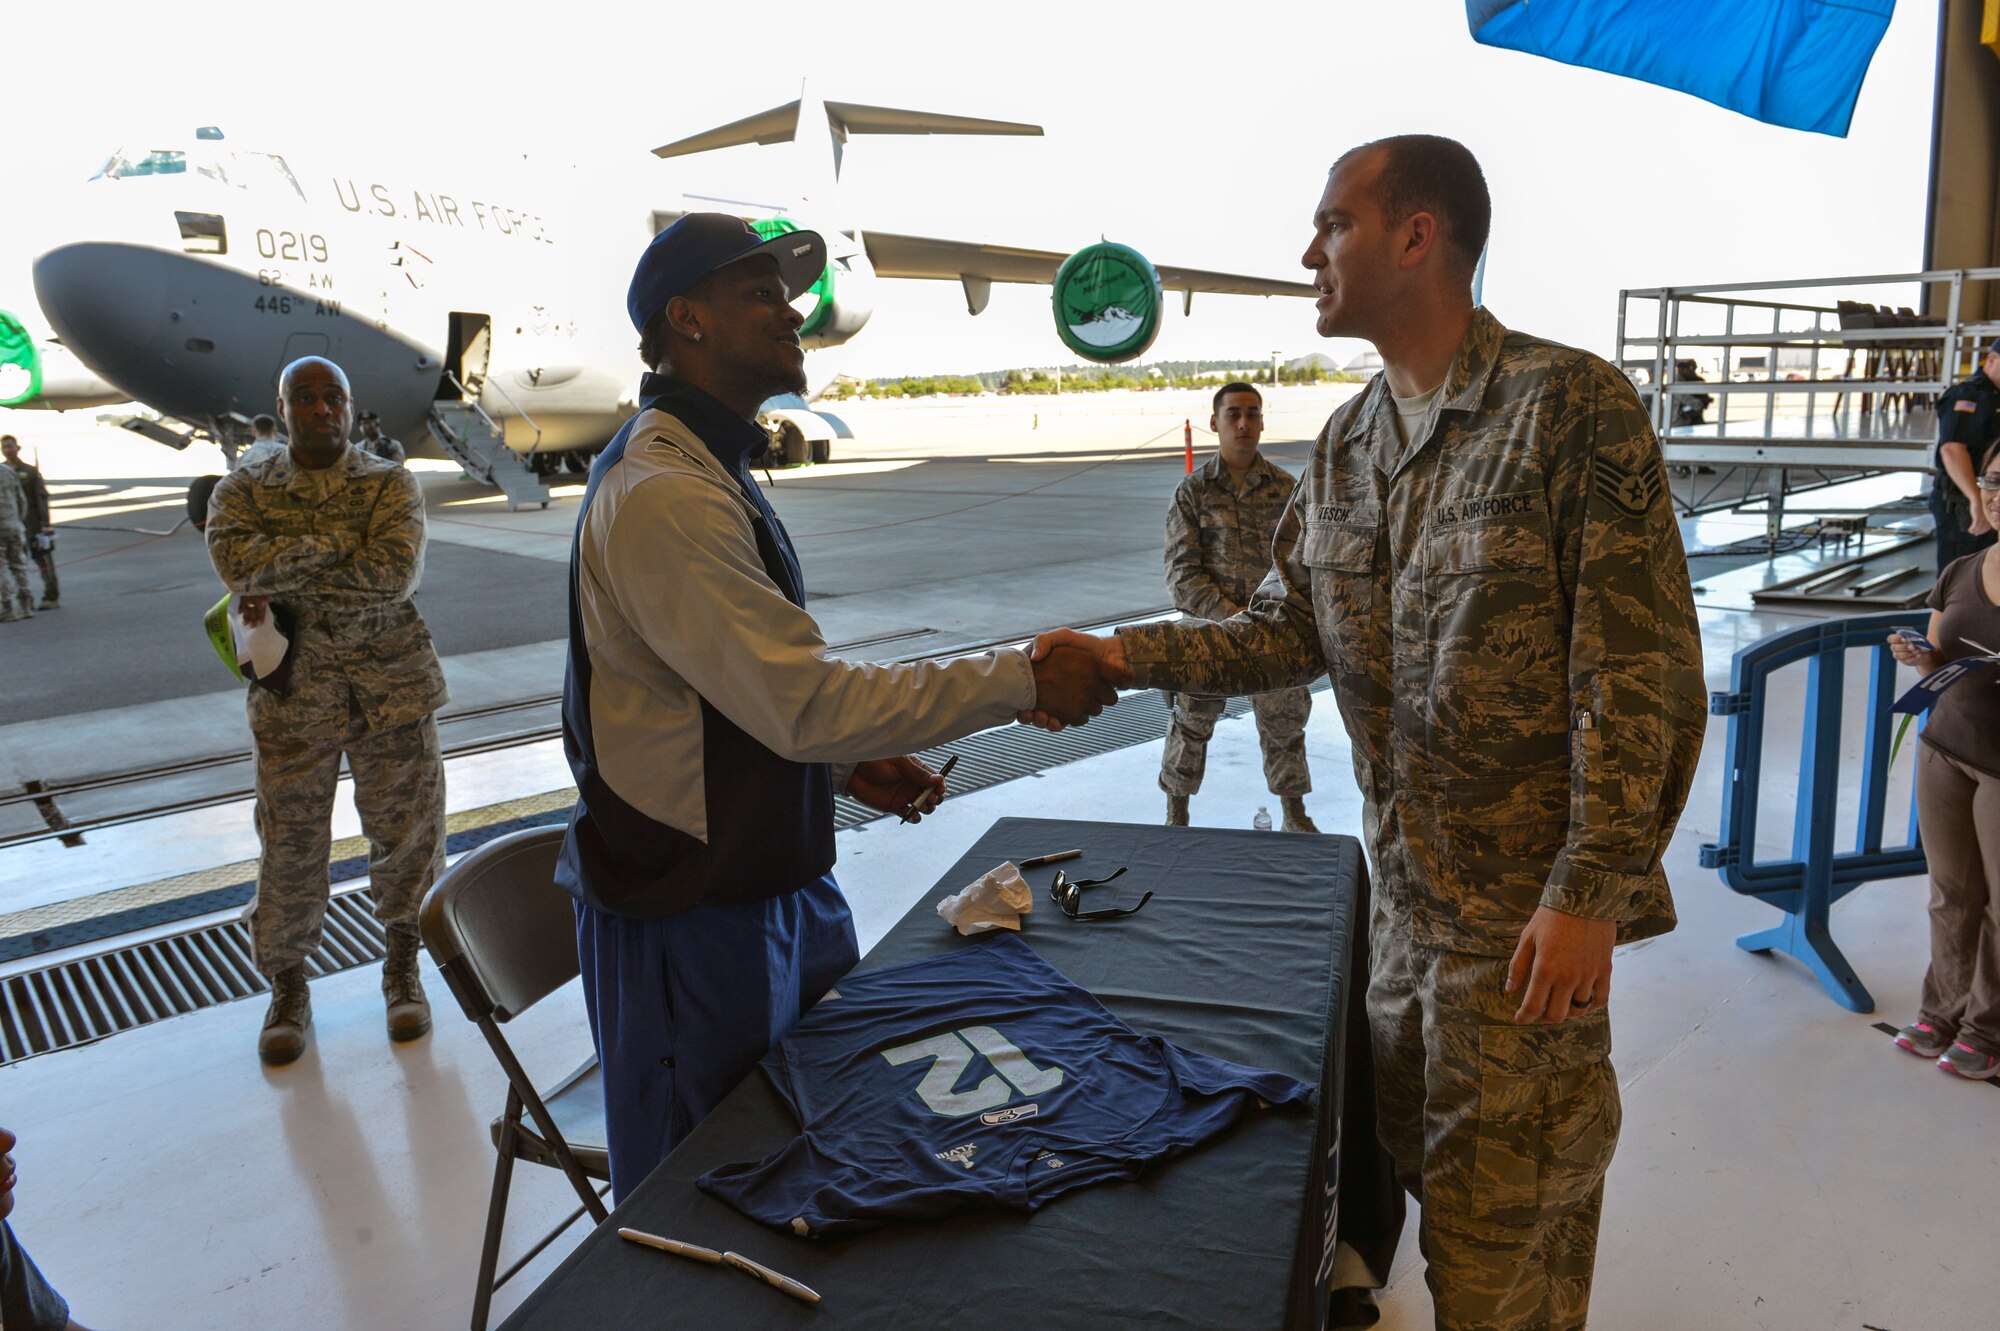 Phil Bates (left), Seattle Seahawks wide receiver, thanks Staff Sgt. Ramsey Tesch (right), for his military service July 1, 2014, after signing a shirt for his Airman Leadership School during the 2014 Seattle Seahawks 12 Tour at Joint Base Lewis-McChord, Wash. Bates is part of the 12 Tour traveling through the Pacific Northwest thanking fans for their support during the championship season. (U.S. Air Force photo/Staff Sgt. Russ Jackson)